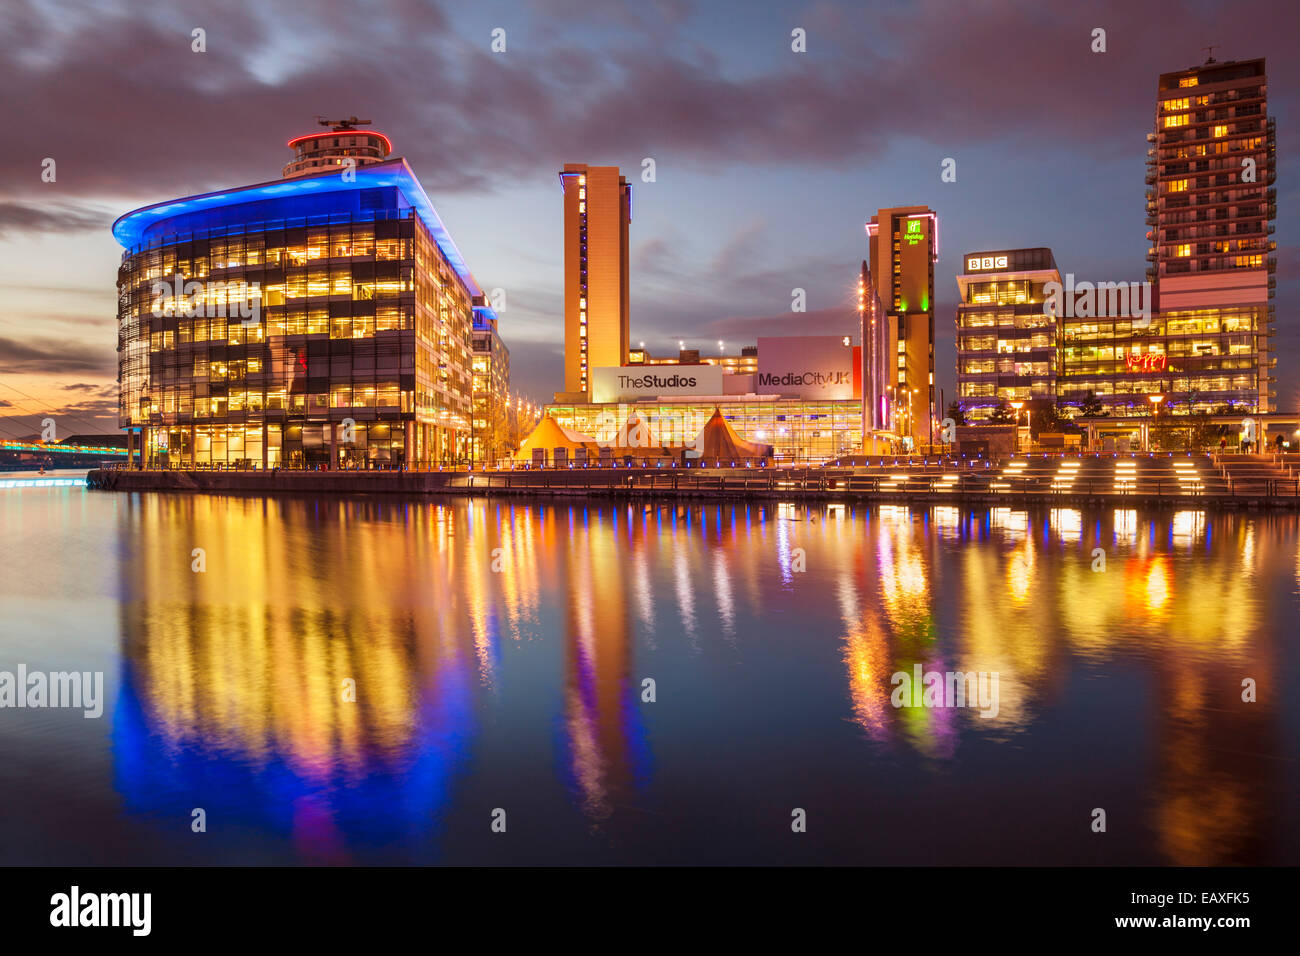 Media City UK Salford Quays Manchester Cityscape Greater Manchester Inghilterra UK GB EU Europe Foto Stock